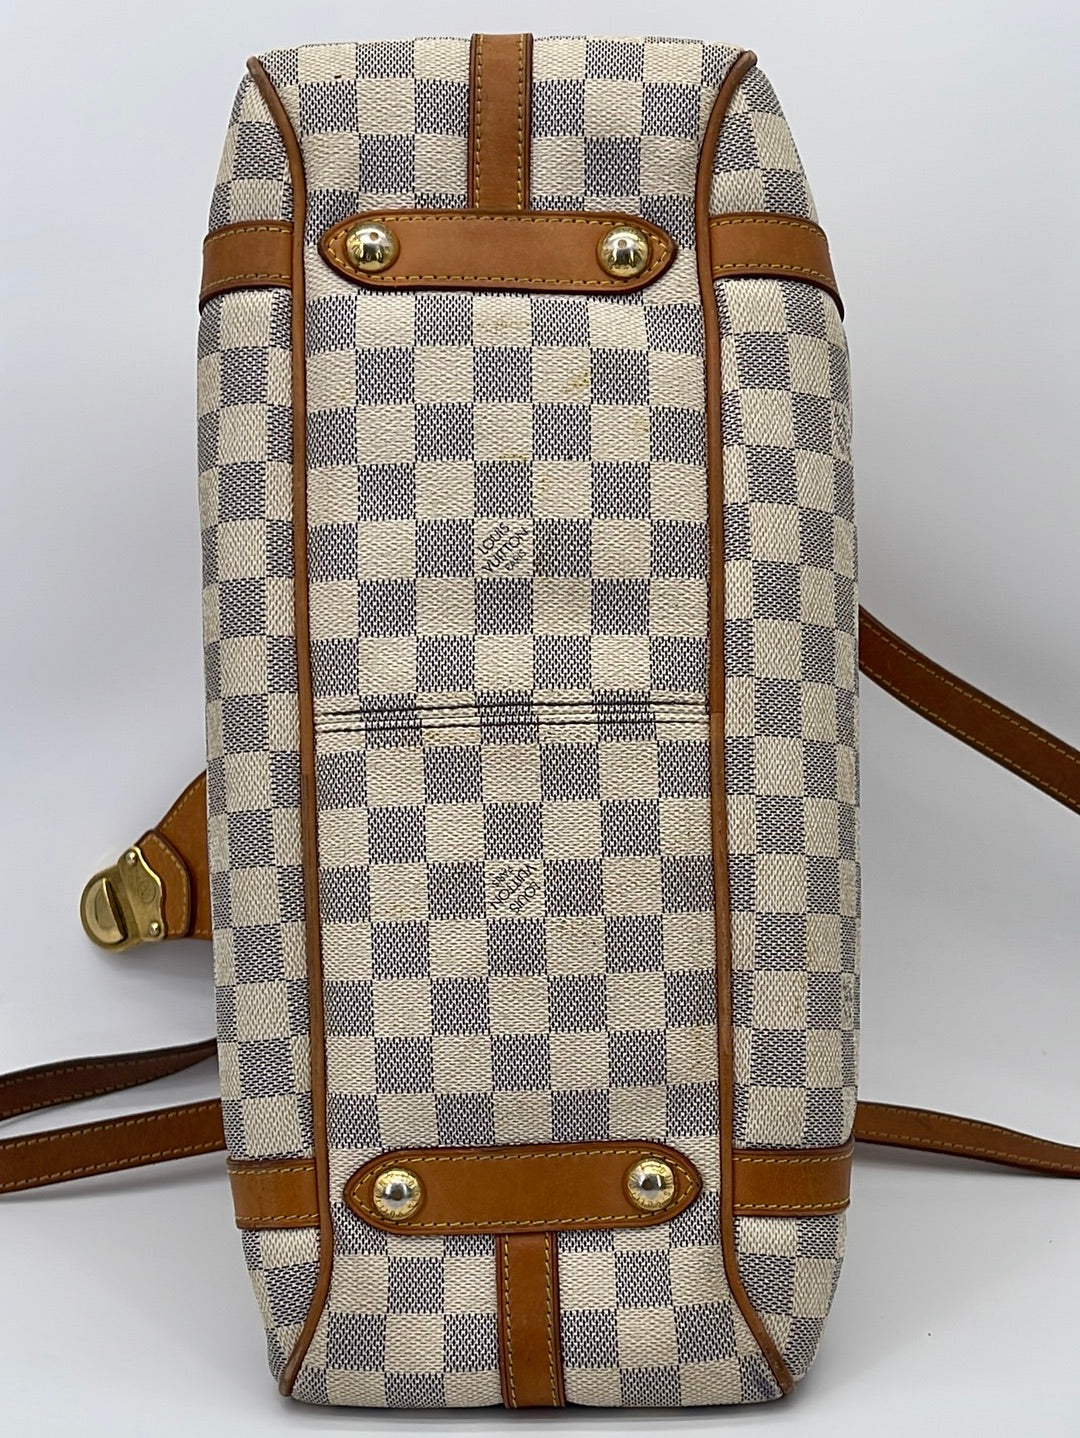 Backpack Organizer For Louis Vuitton Sperone Backpack